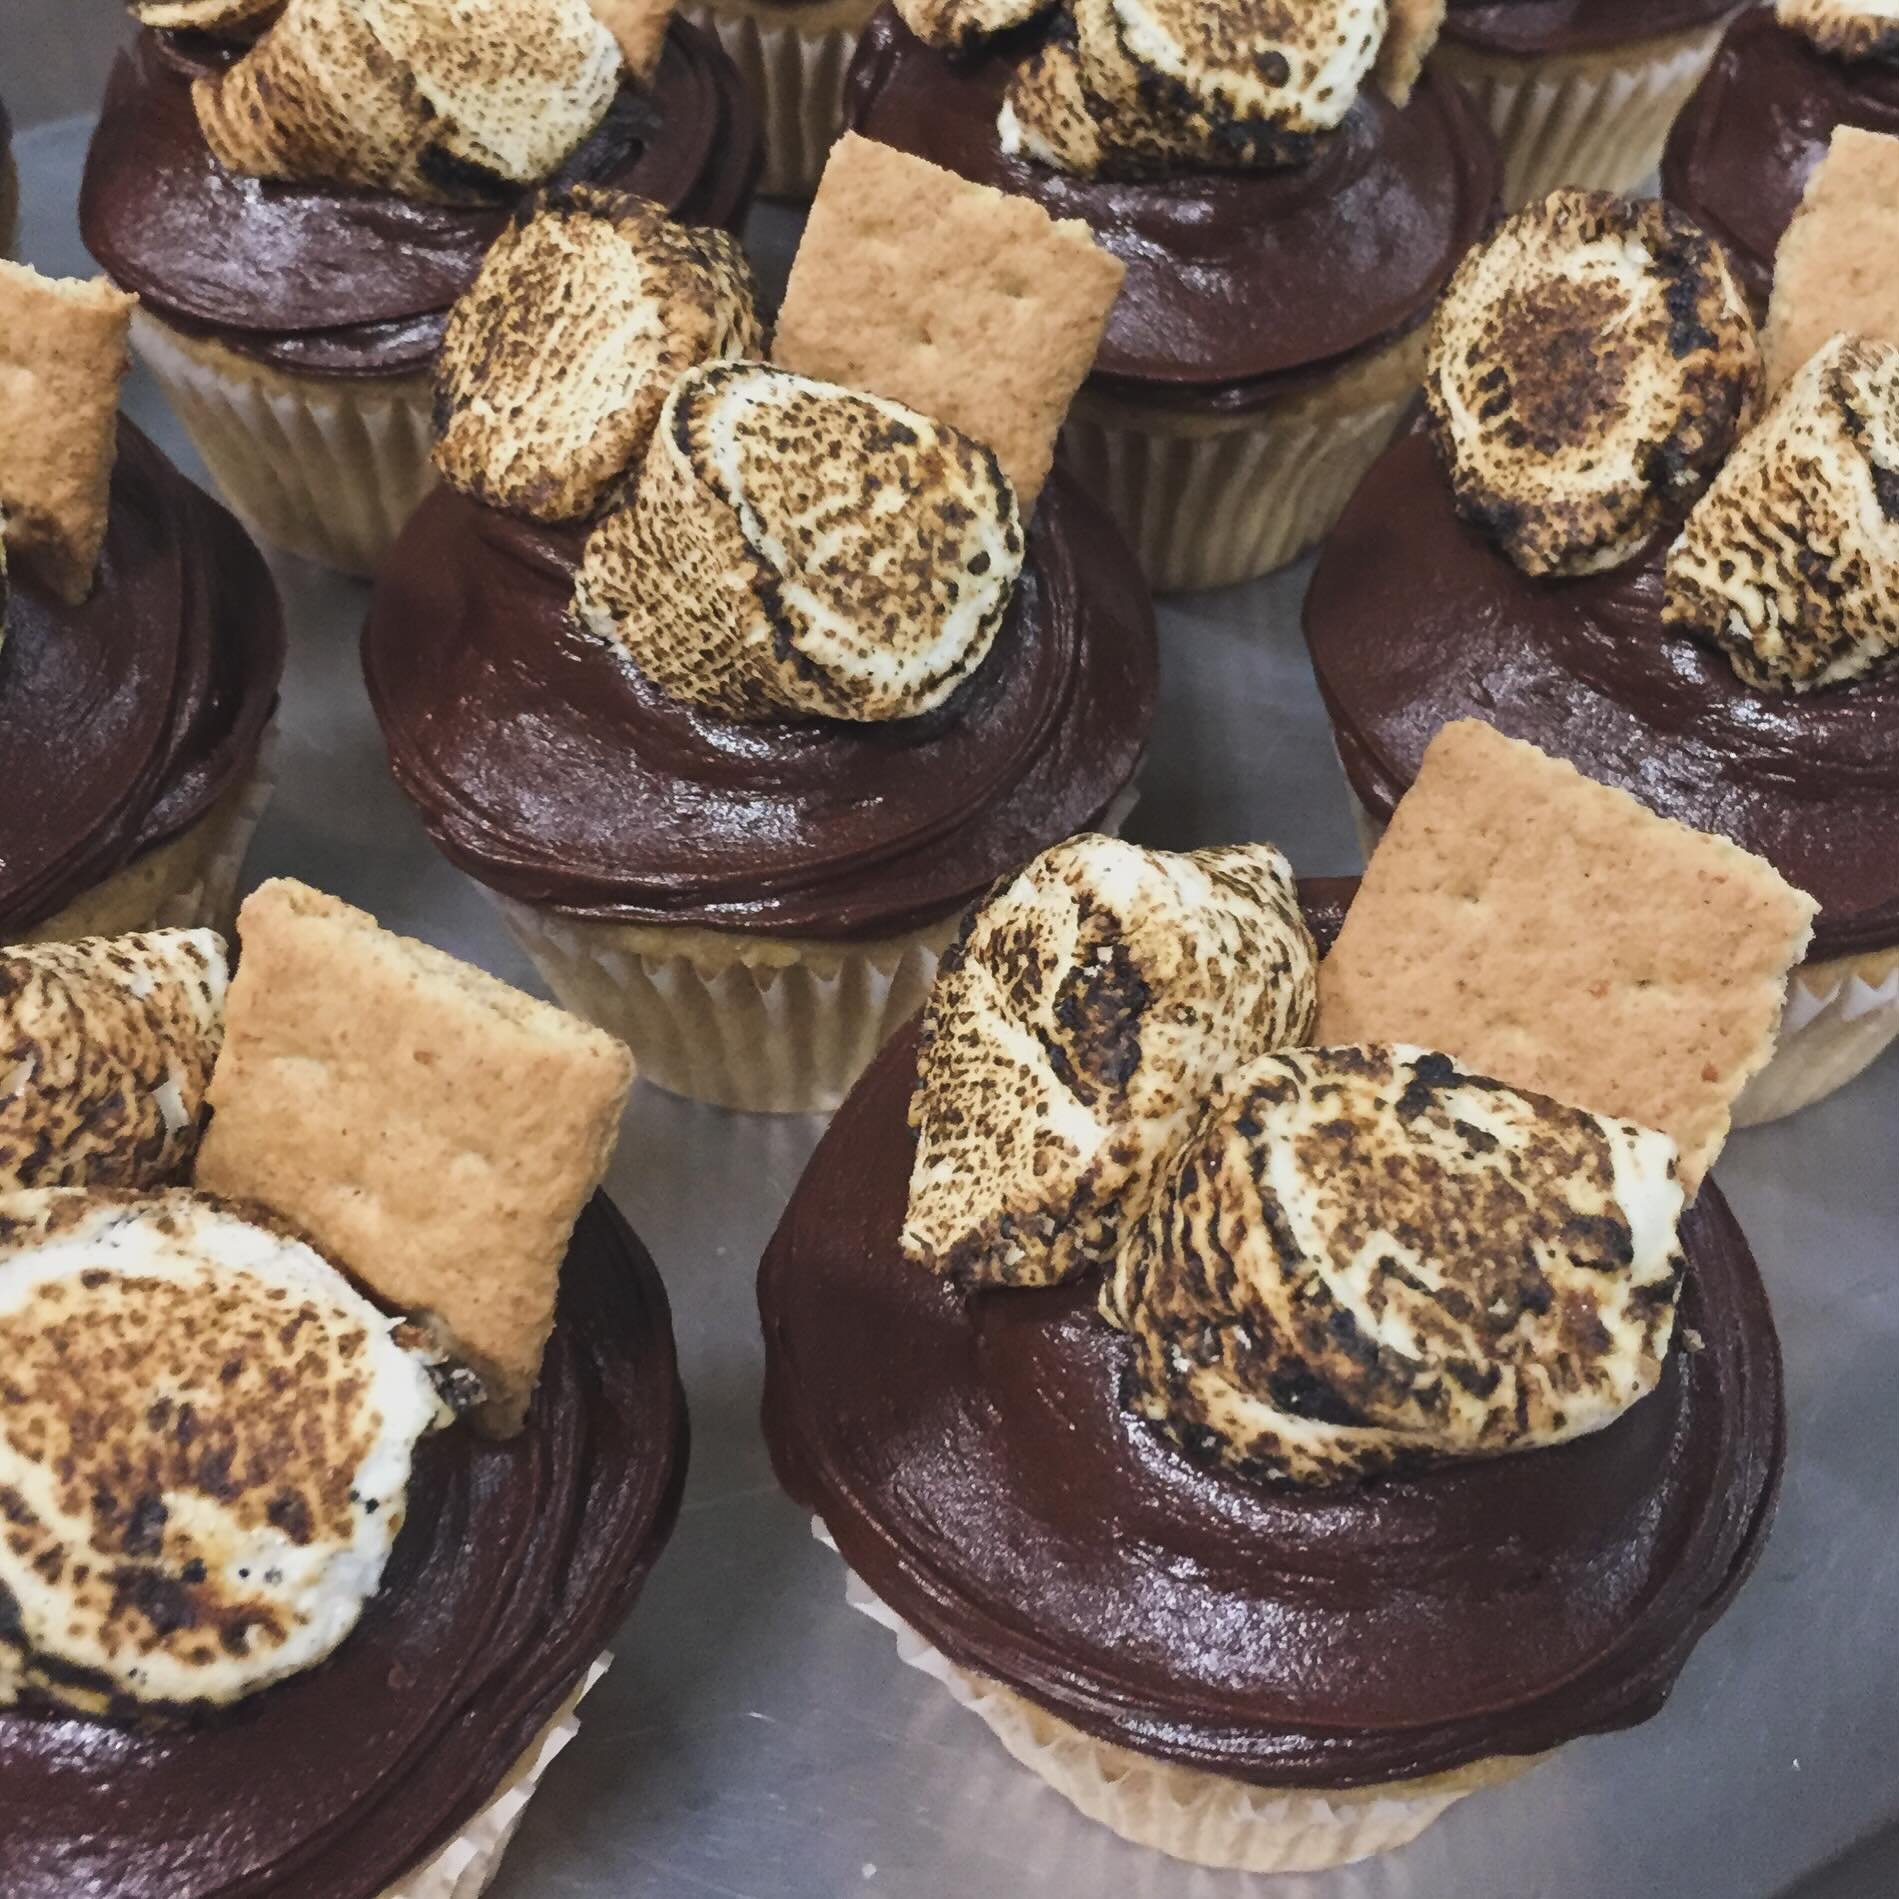 A favorite is back! Our S&rsquo;mores is here all month. Now summer can officially start! #FOM #frostedcupcakery #belmontshore #2ndstreet